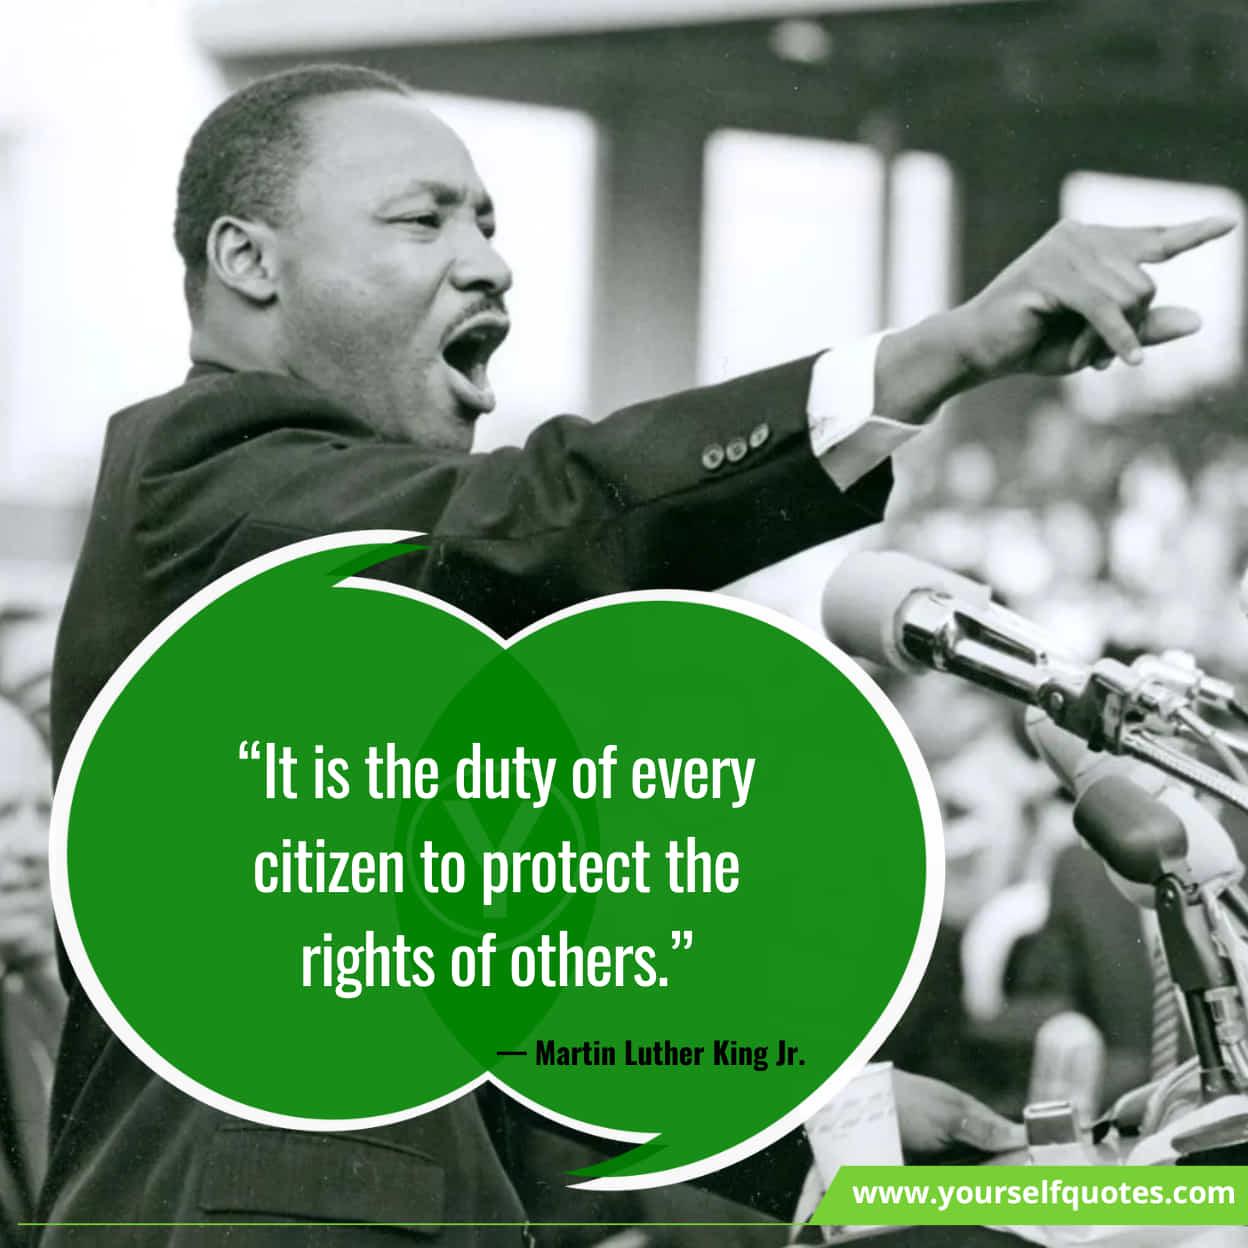 Human Rights Day Quotes